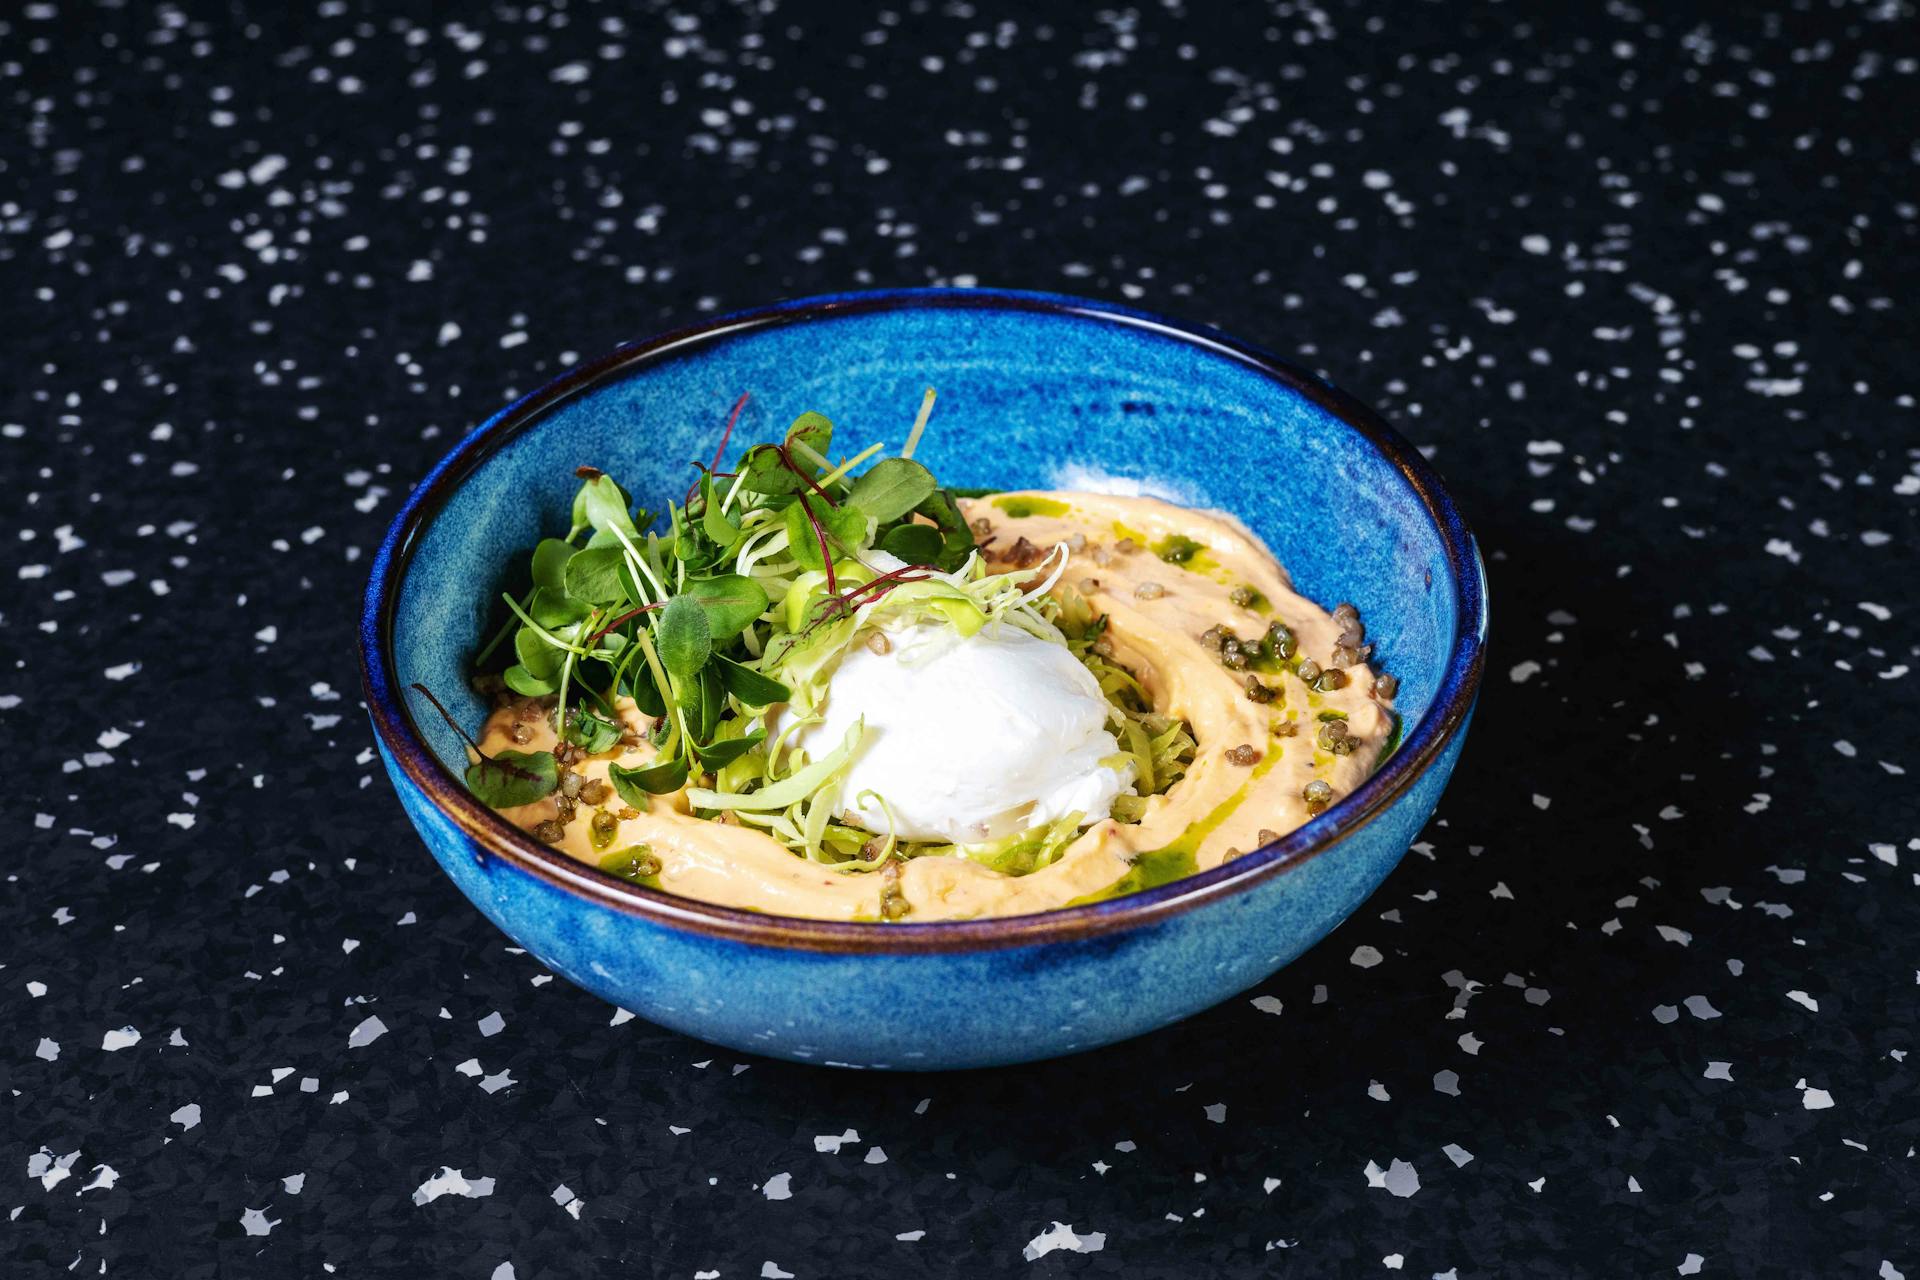 <p>Fine strips of marinated green cabbage, poached egg, Shiso leaves, ssanjang foam, sakura herbs</p>